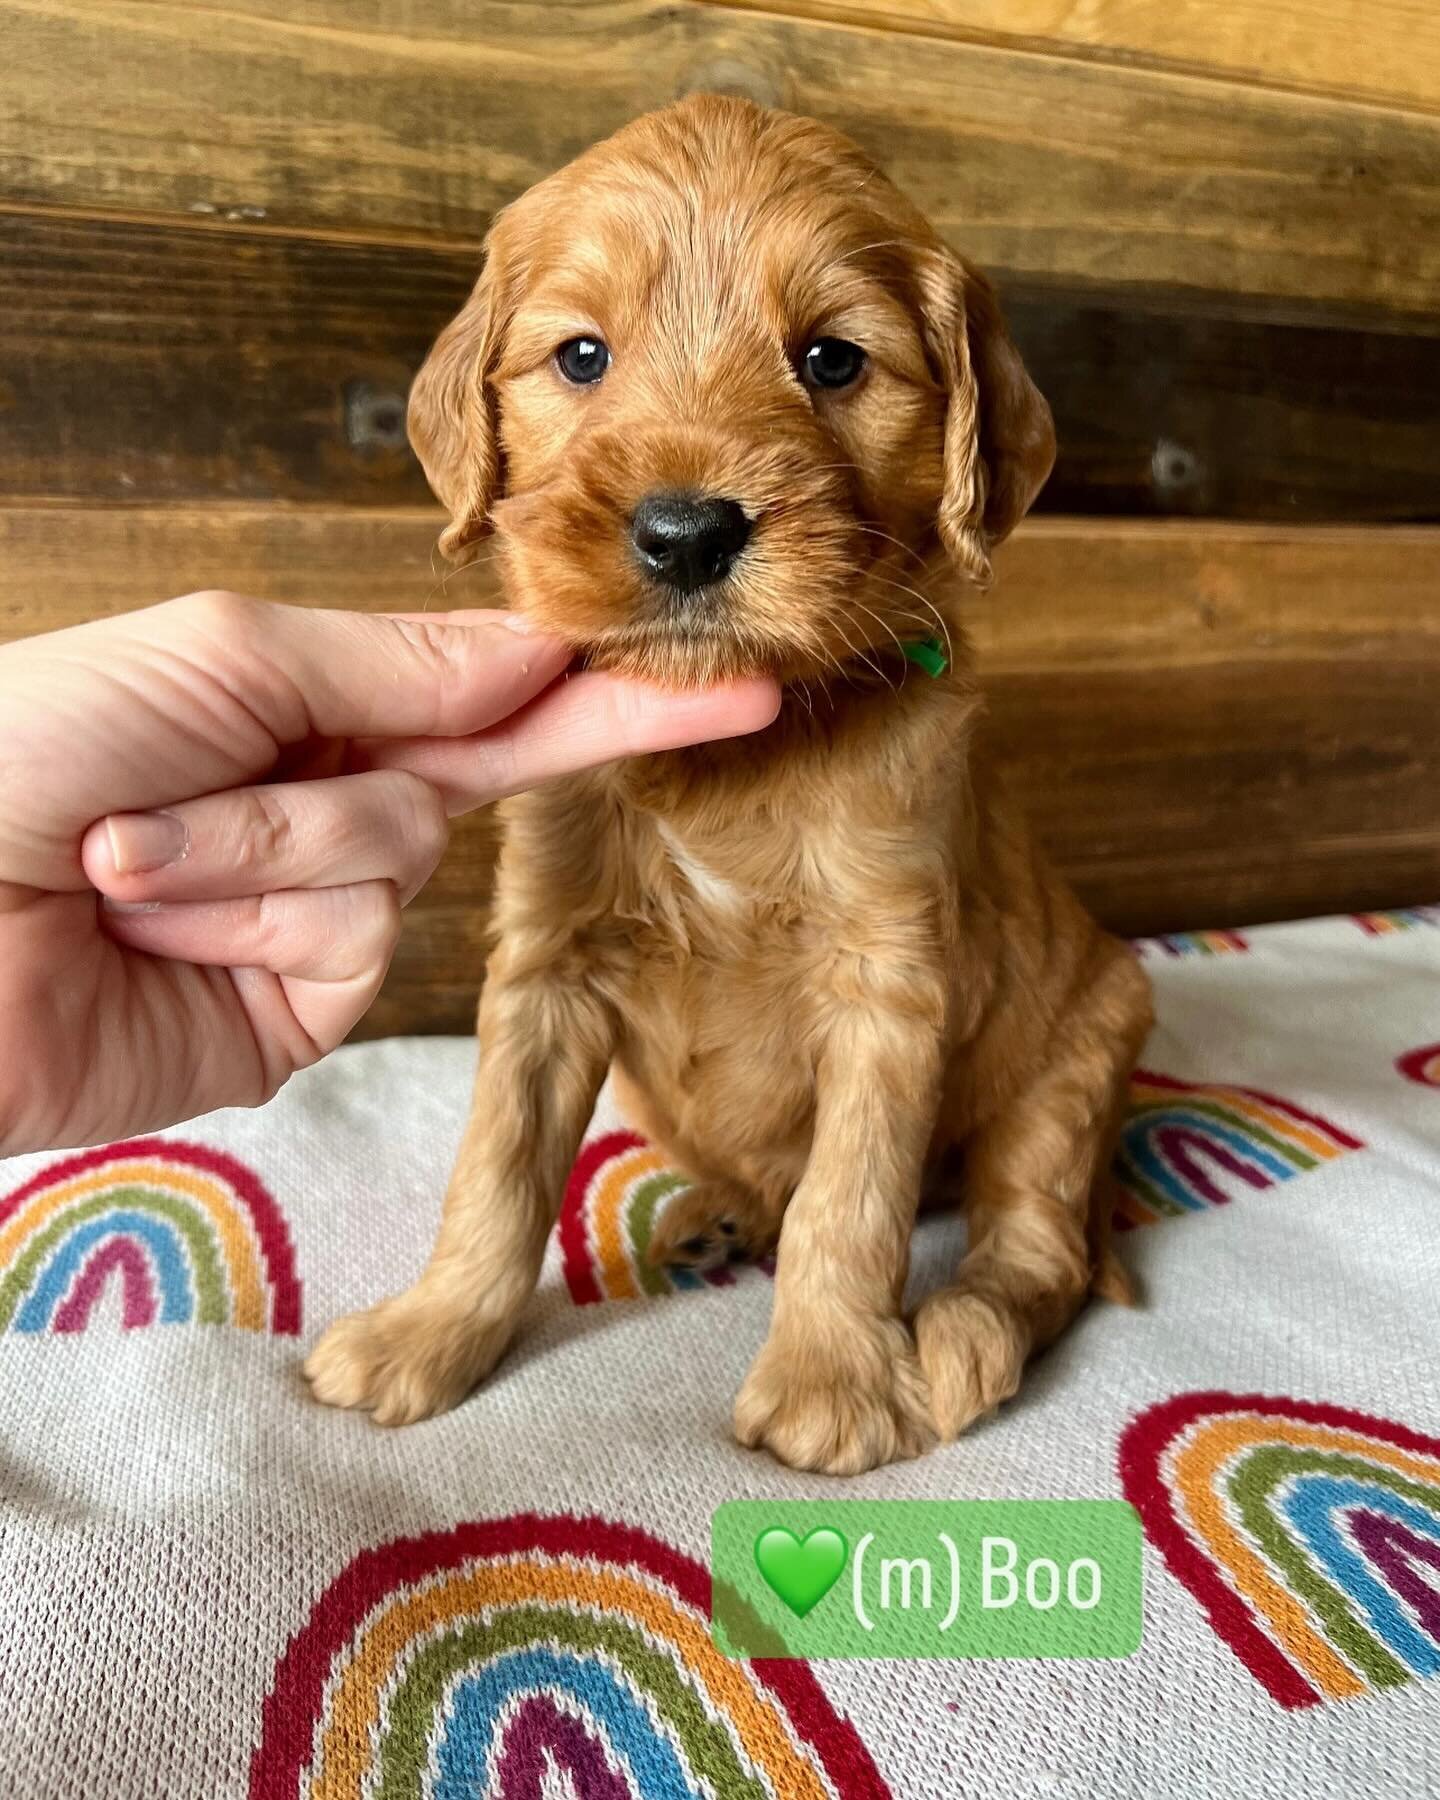 These mini goldendoodles are 🤩! They are a higher percentage of golden retriever while maintaining a low to non shedding coat. They&rsquo;ll have the cutest teddy bear design with wavy coats. We are in love with their blocky faces and intense red co